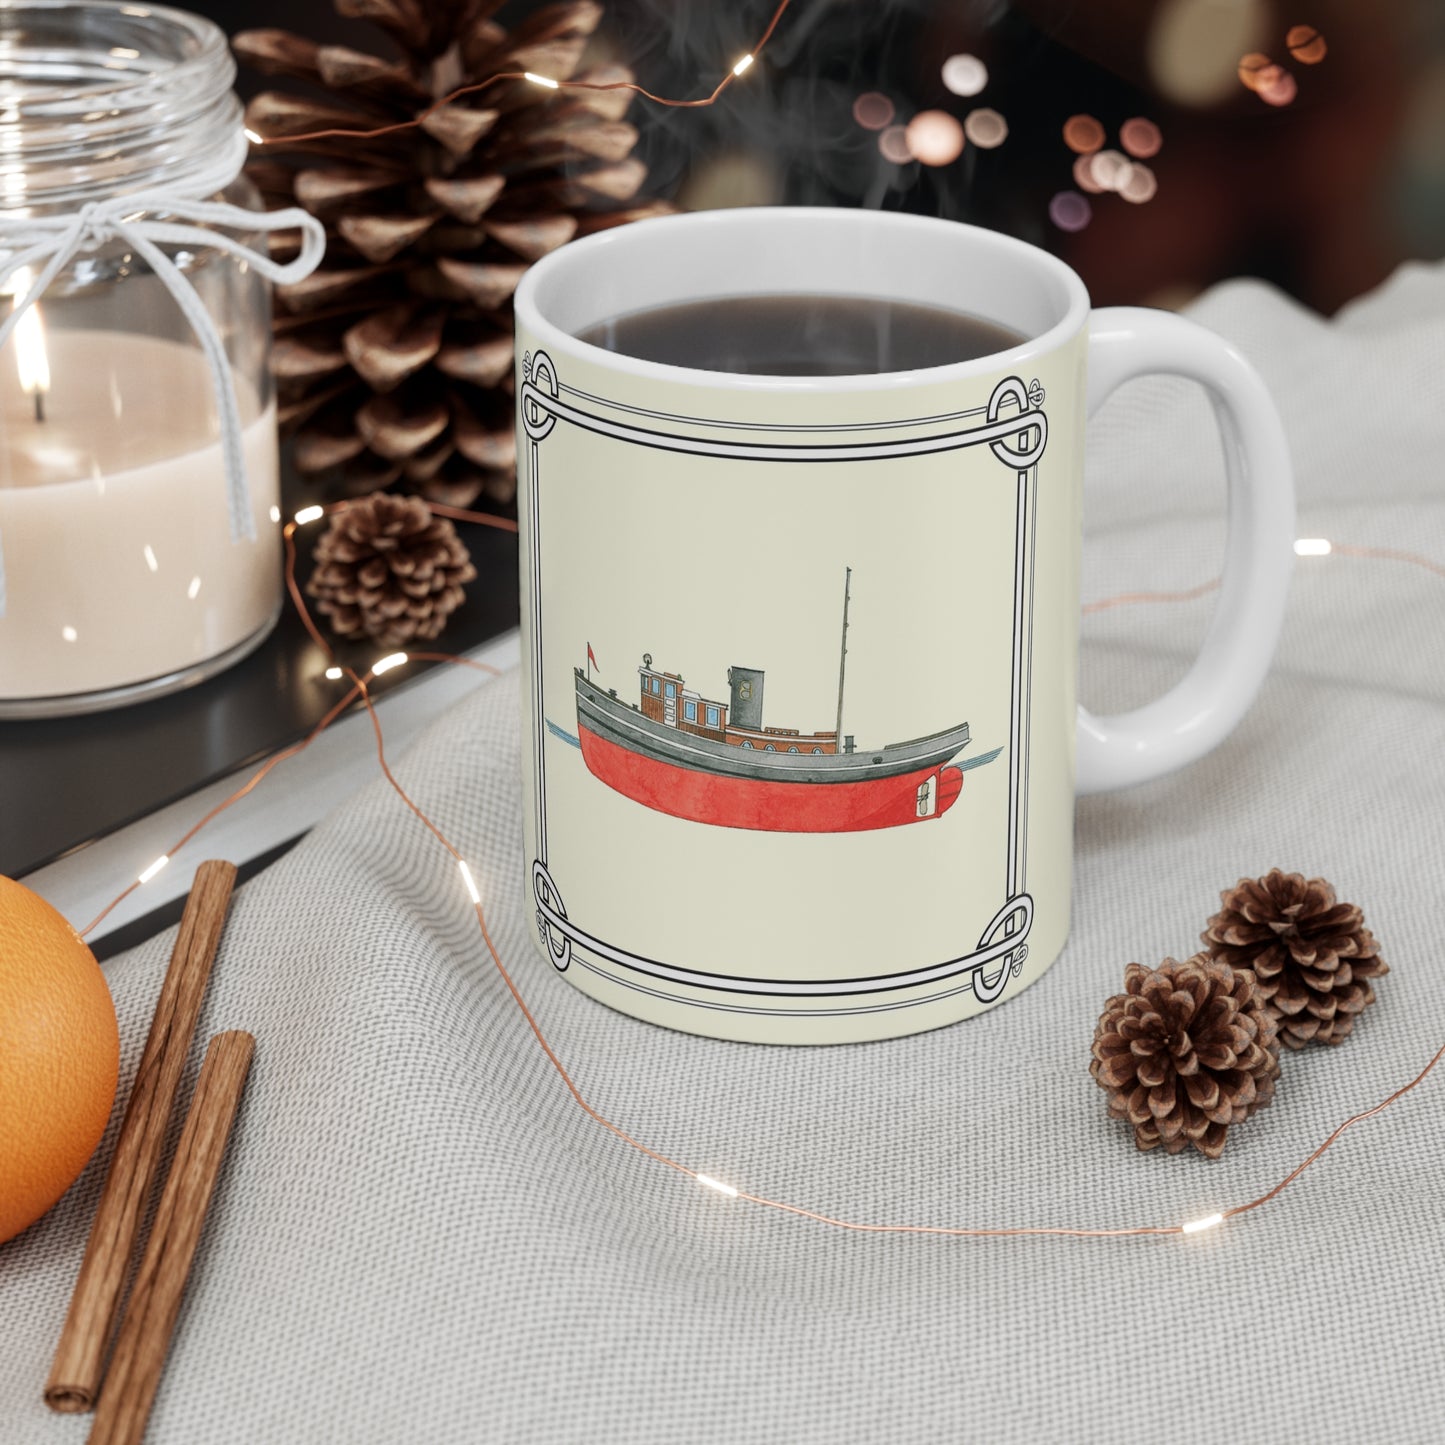 Enjoy a cup of your favorite beverage in the Bright Star Diesel Tugboat Mug.